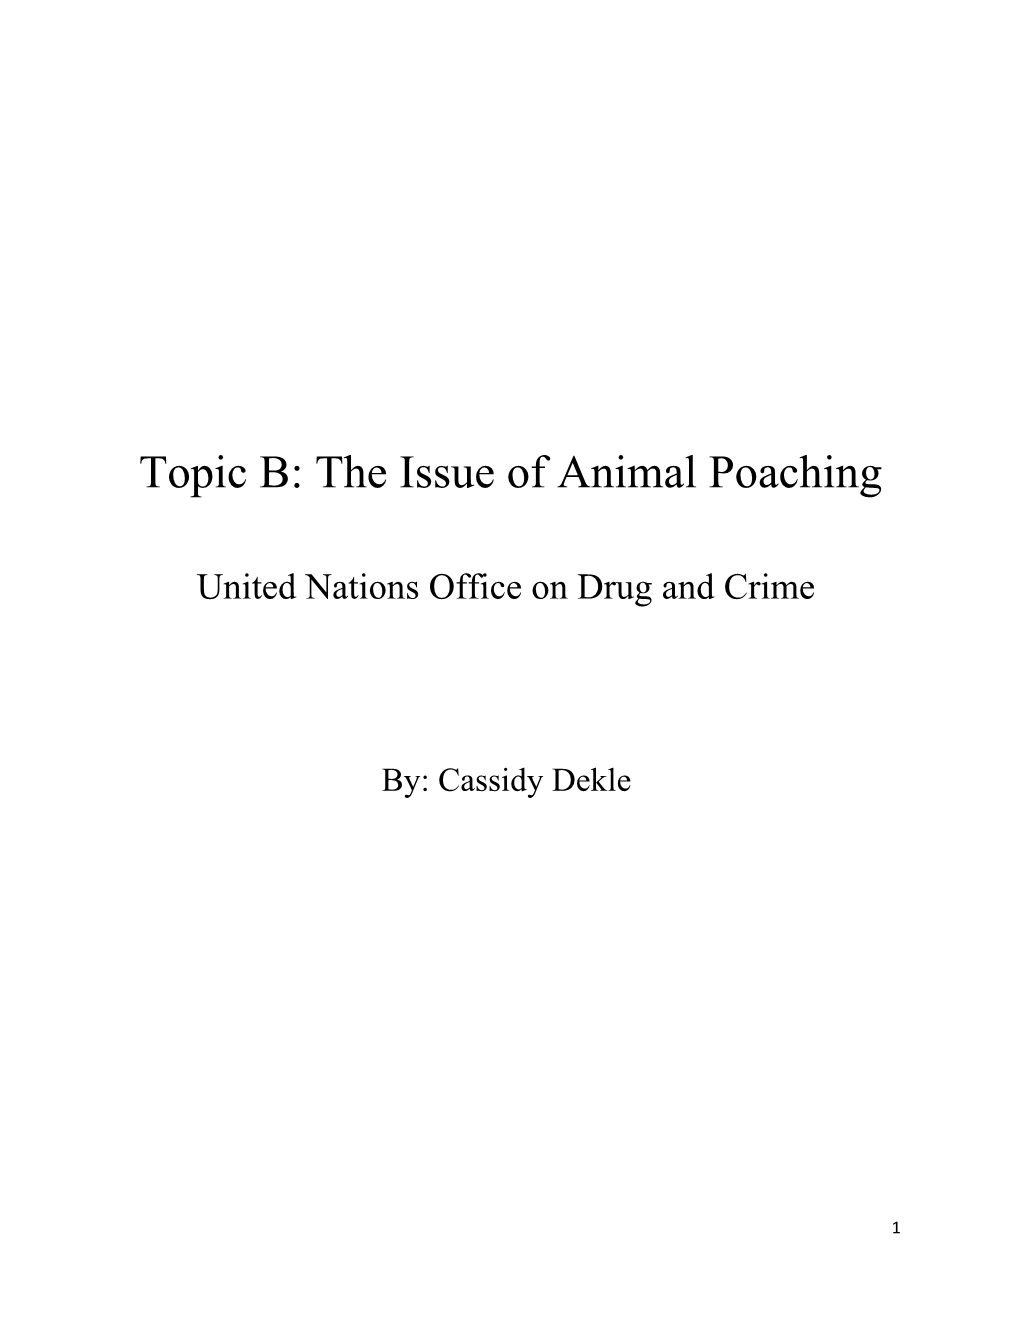 Topic B: the Issue of Animal Poaching